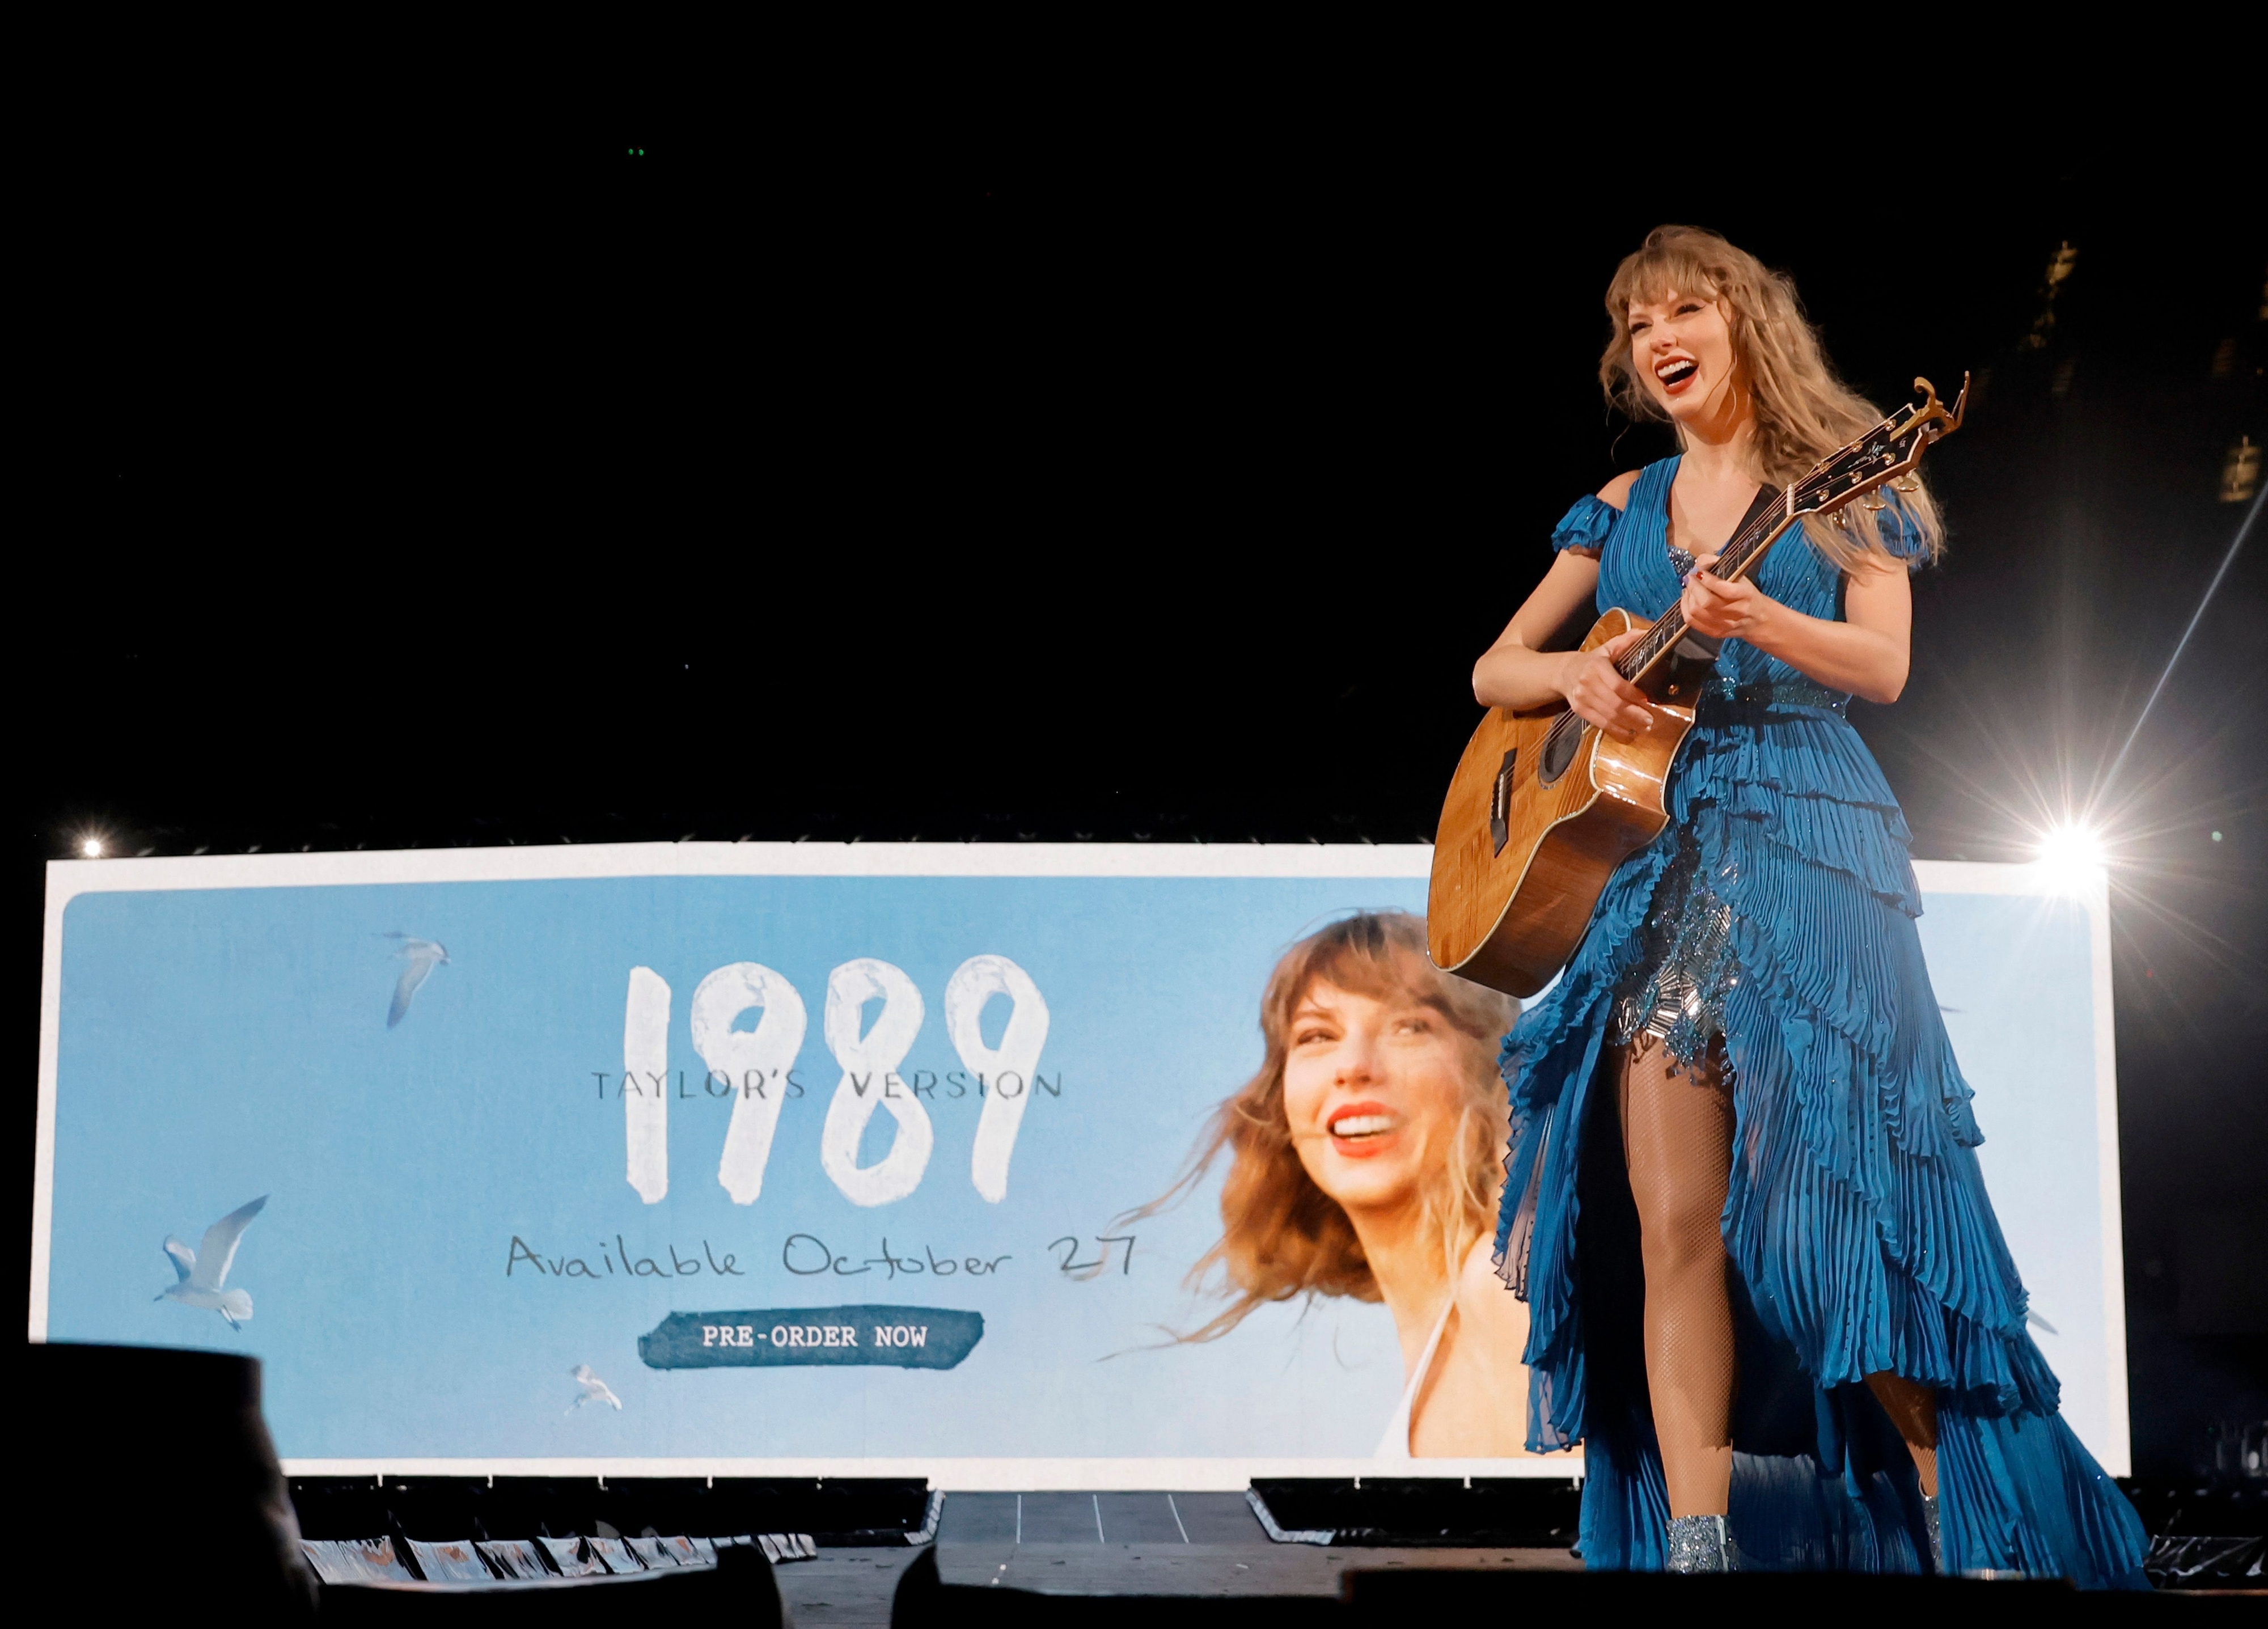 taylor on stage with the cover art of er album on the screen behind her